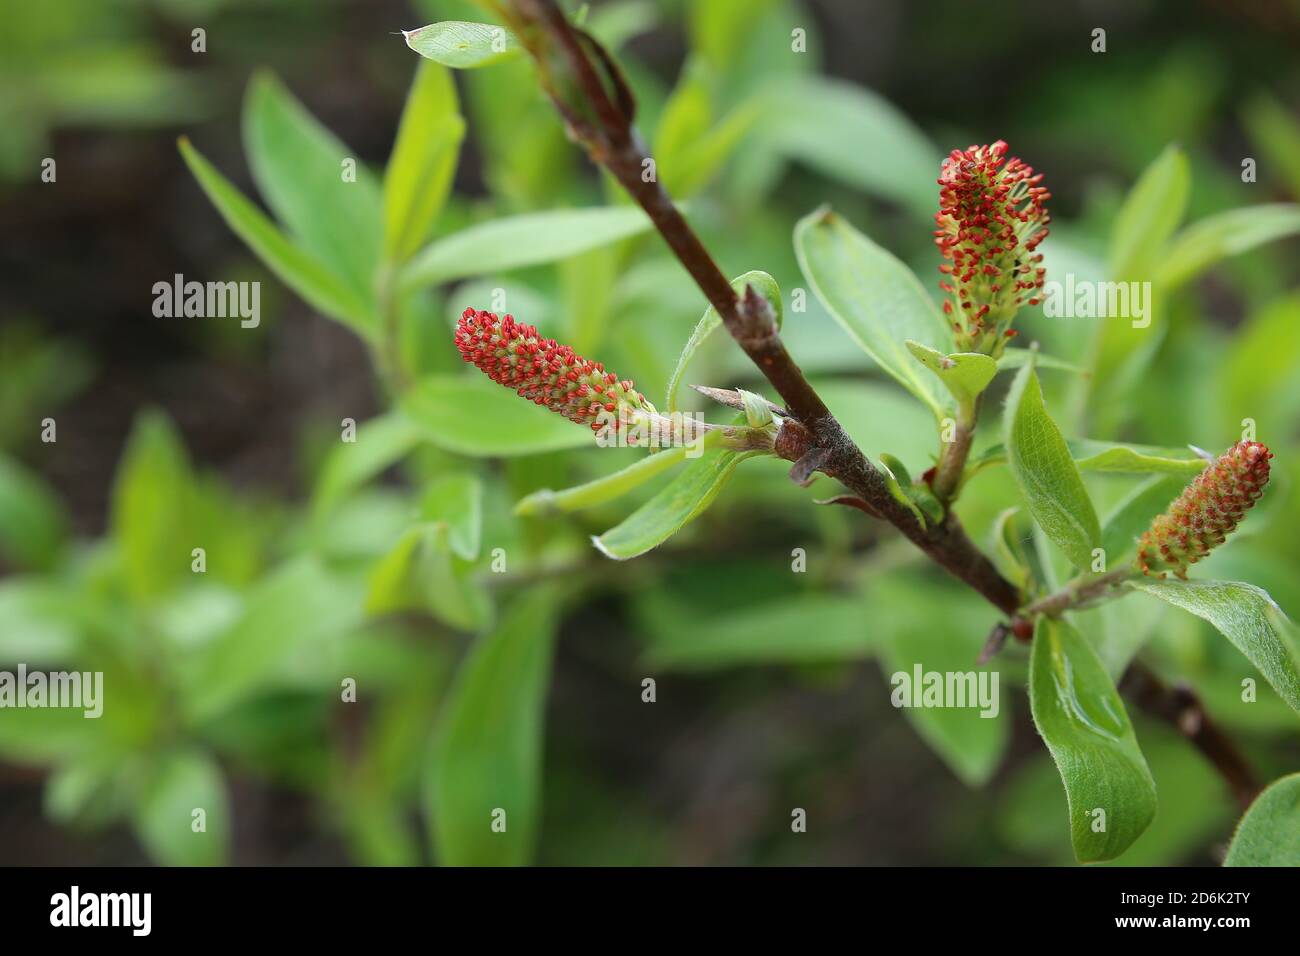 Catkins of Salix glauca, the grayleaf willow. Stock Photo